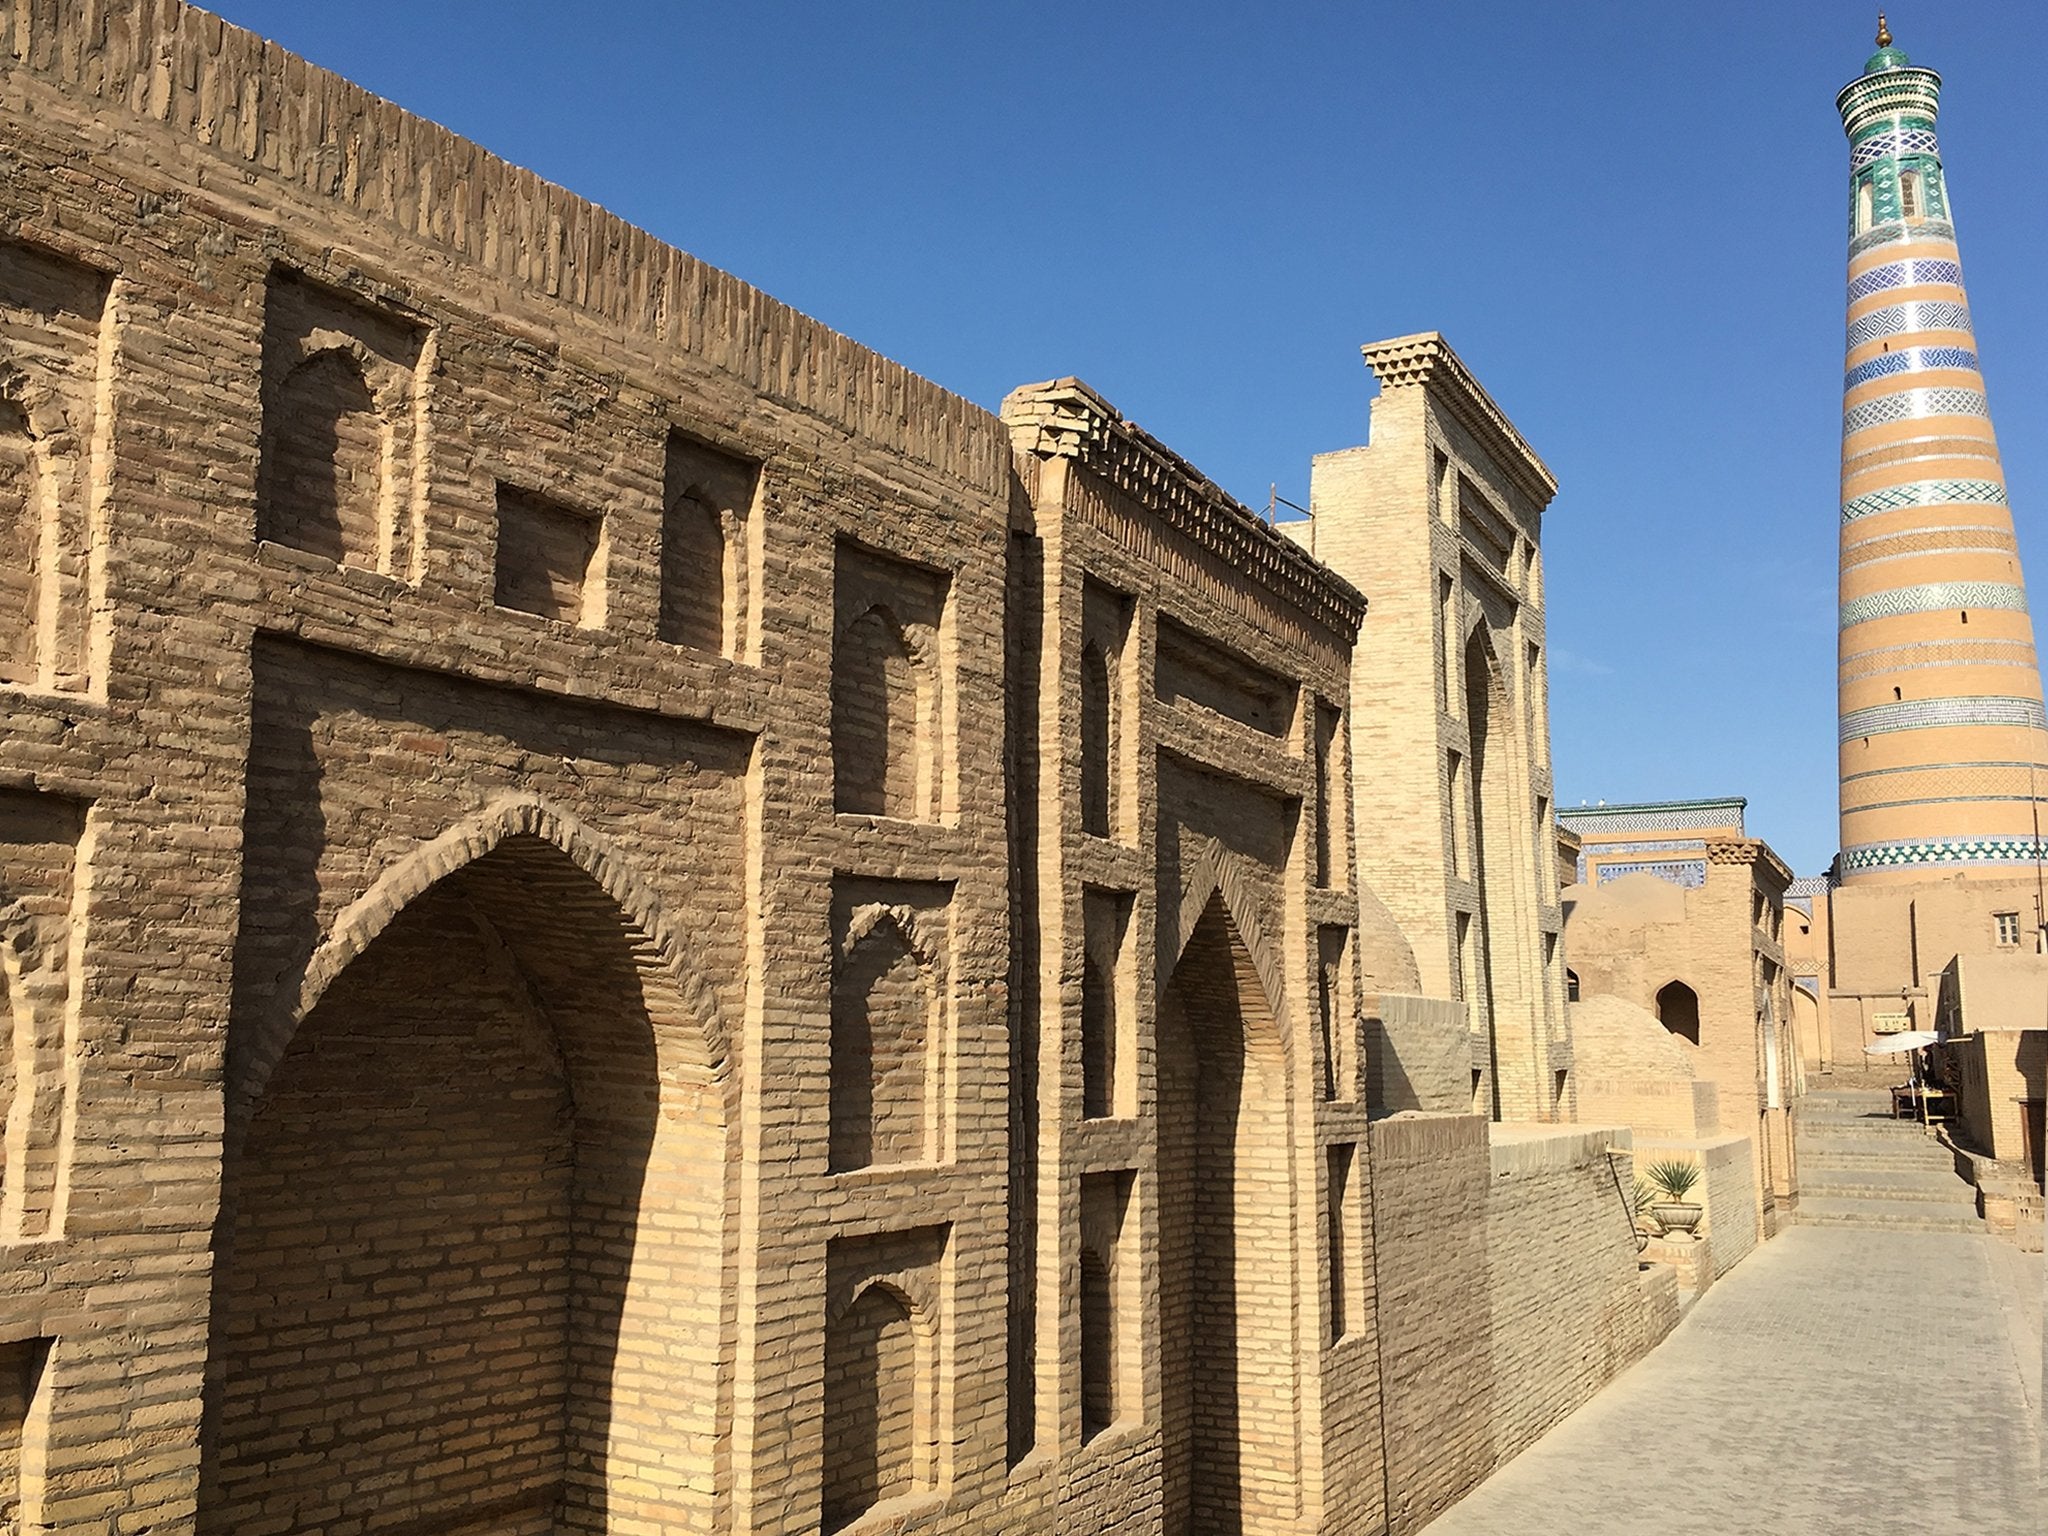 The Ichan Qala in Khiva in Uzbekistan, now much easier to see due to tourism reform